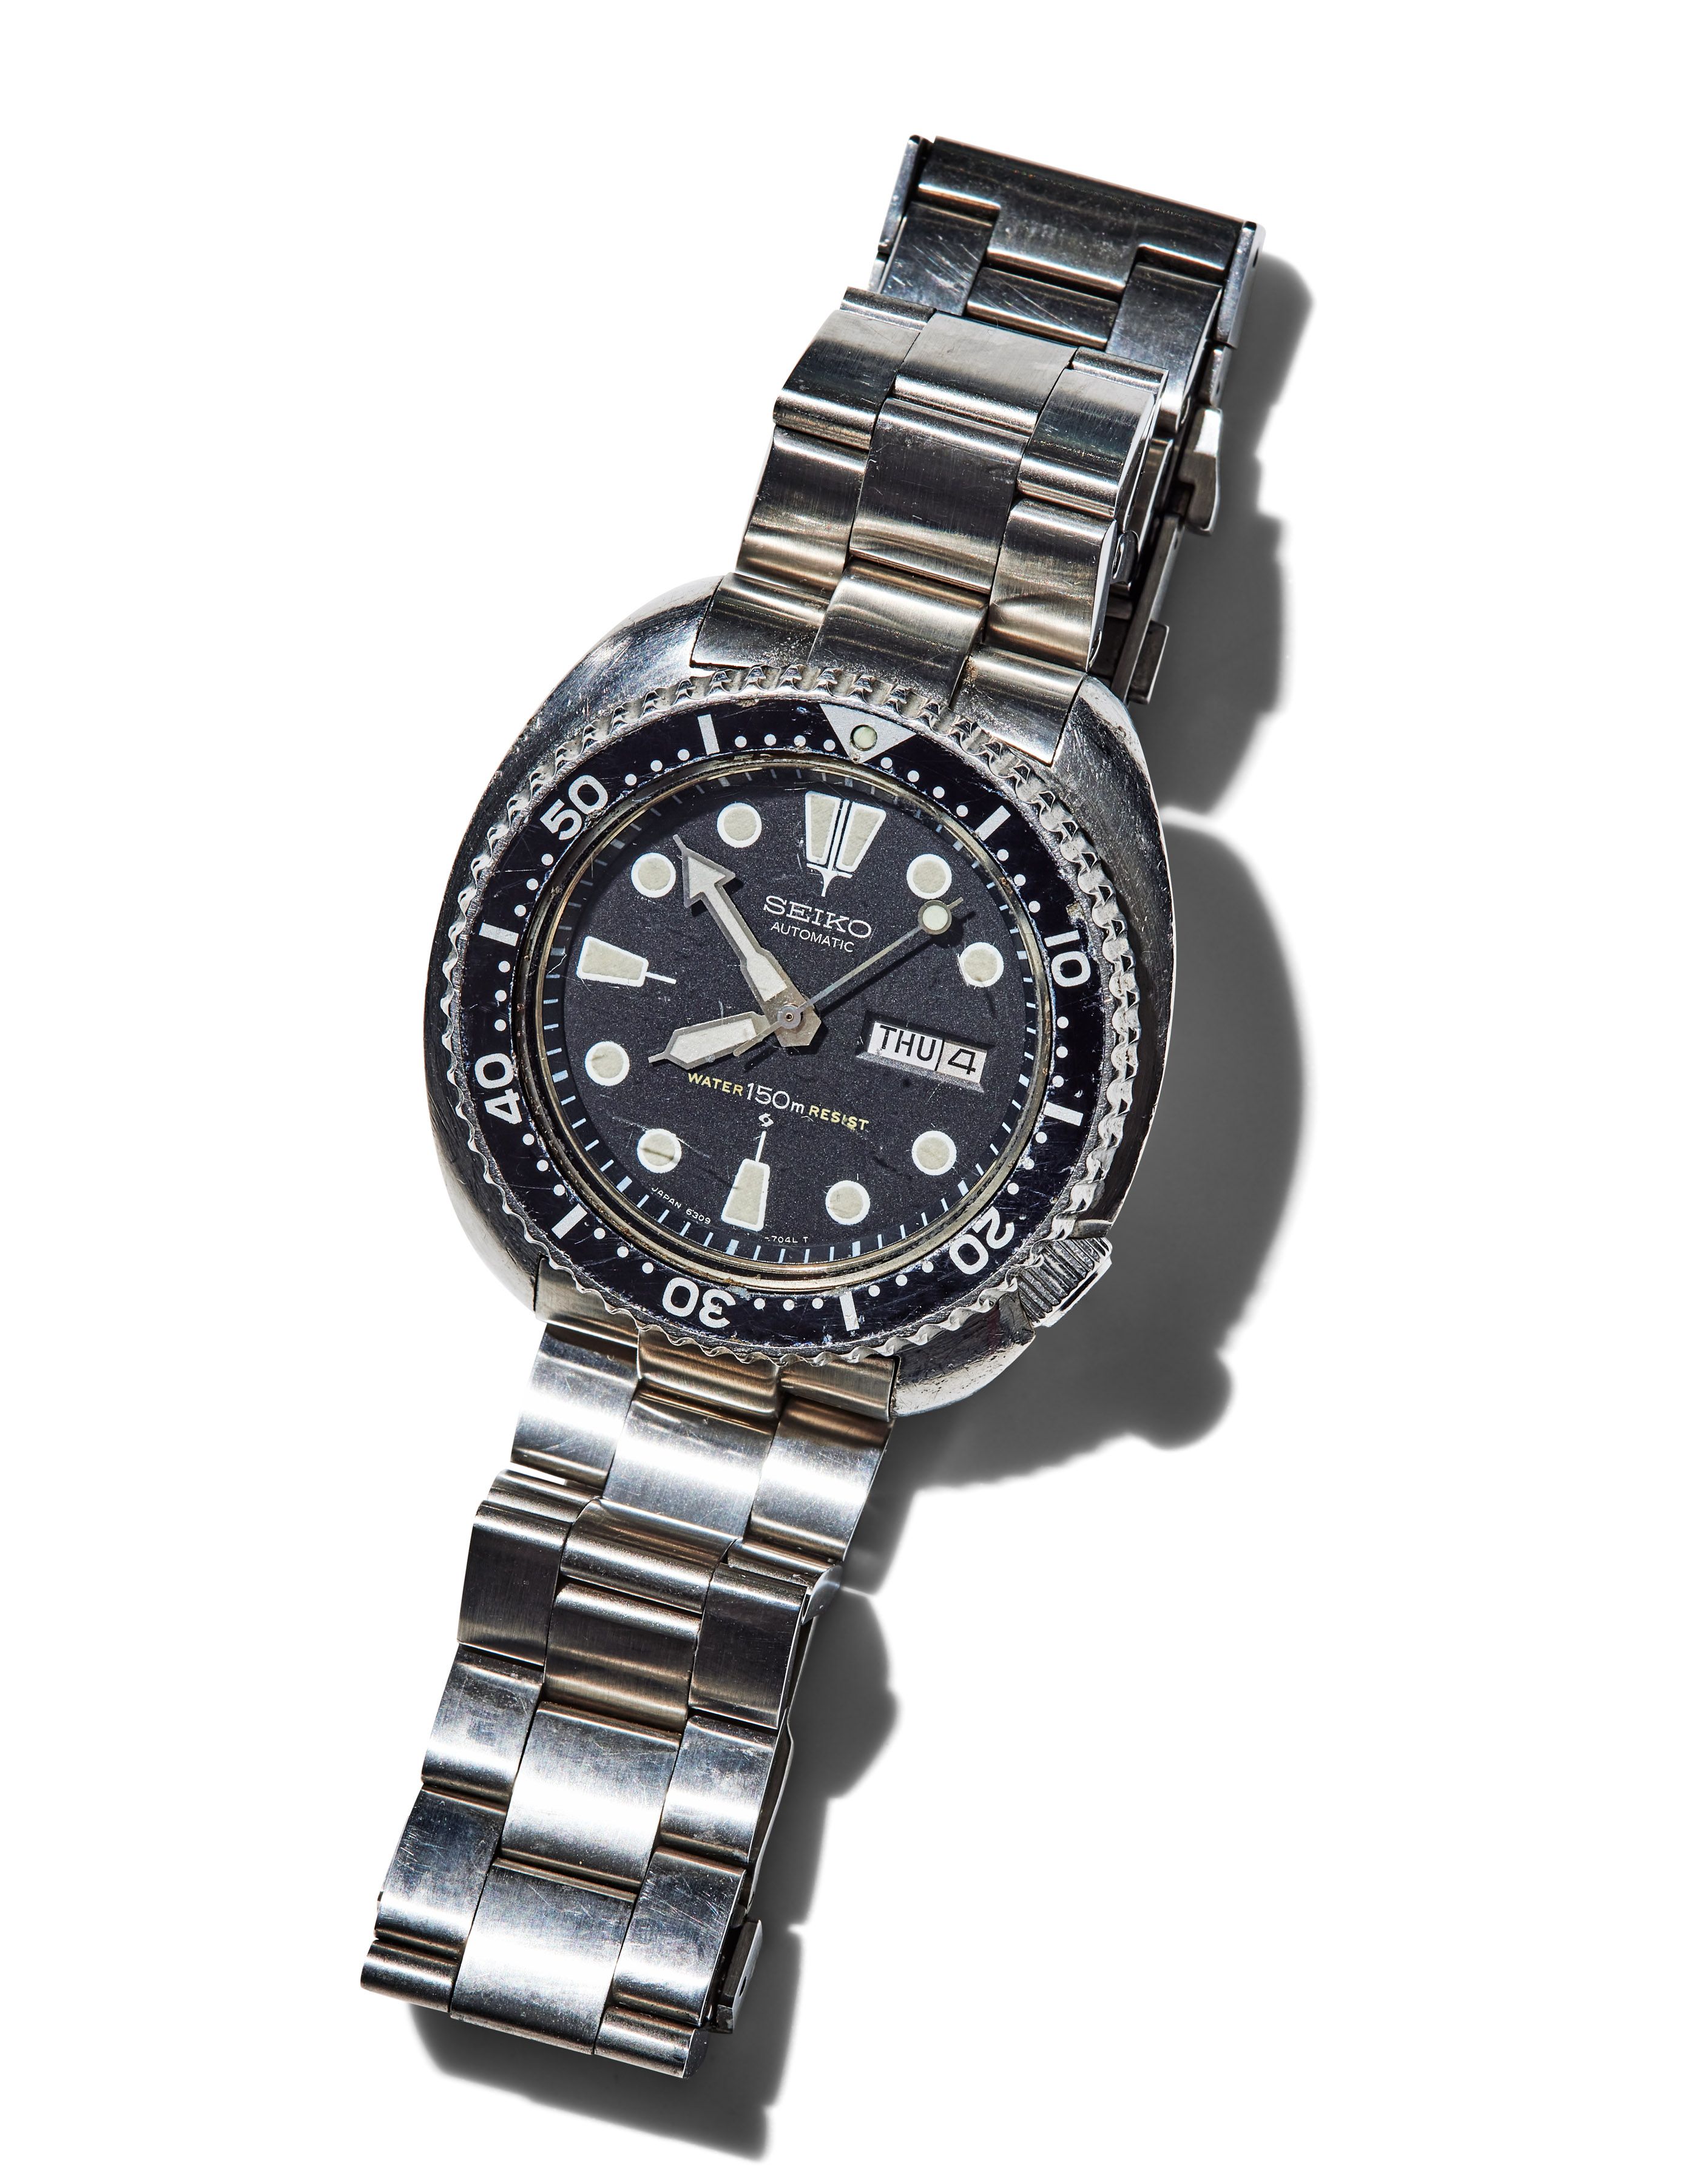 Melbourne Hylde misundelse This Seiko Diver Isn't Just a Watch. It's a Reminder.